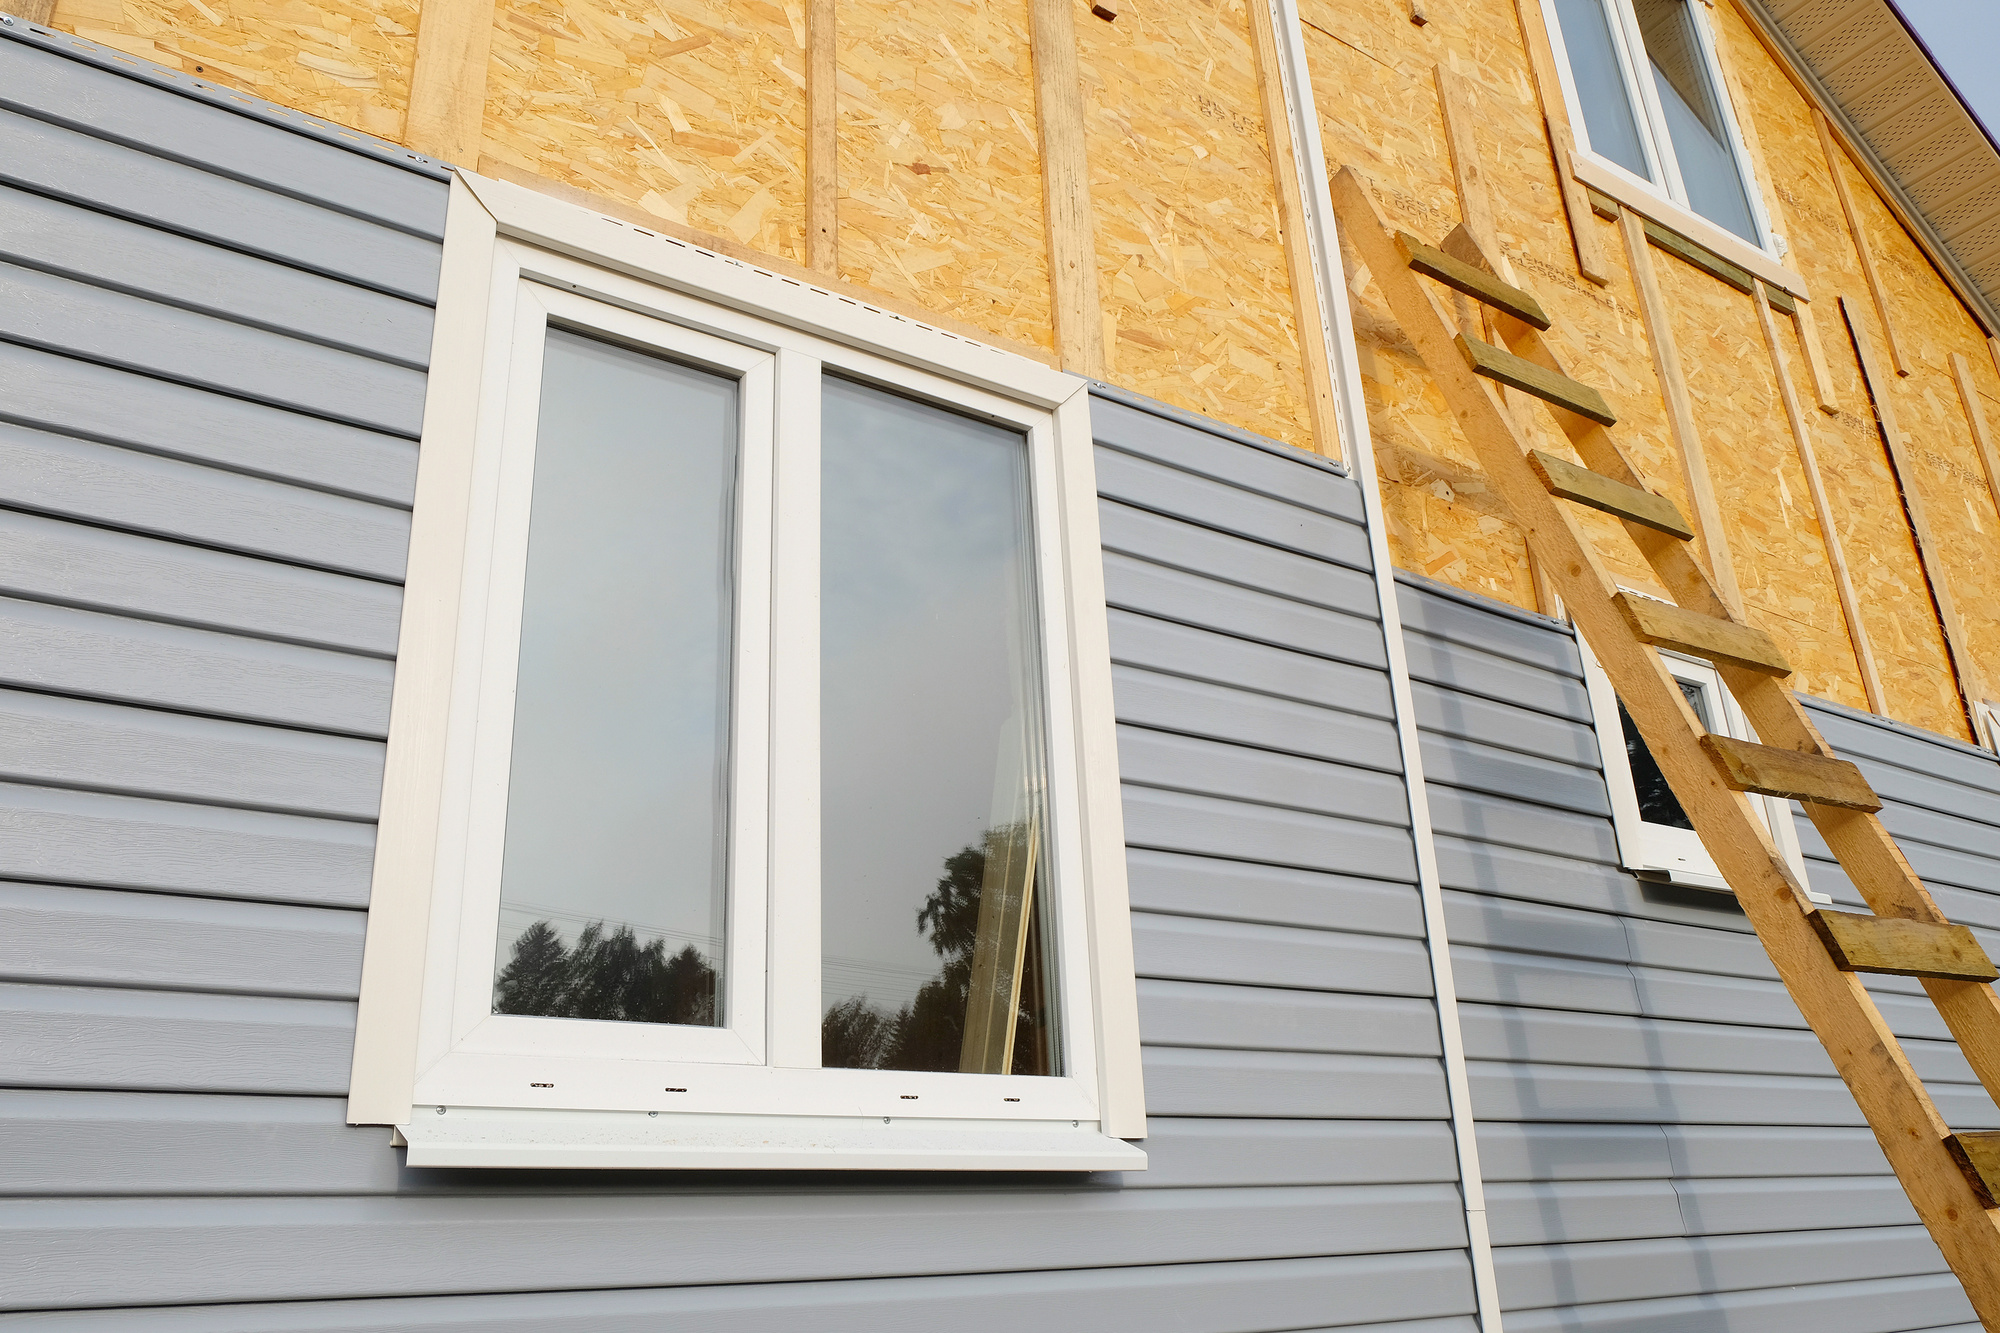 Vertical vs Horizontal Siding: Which Side Should You Choose?